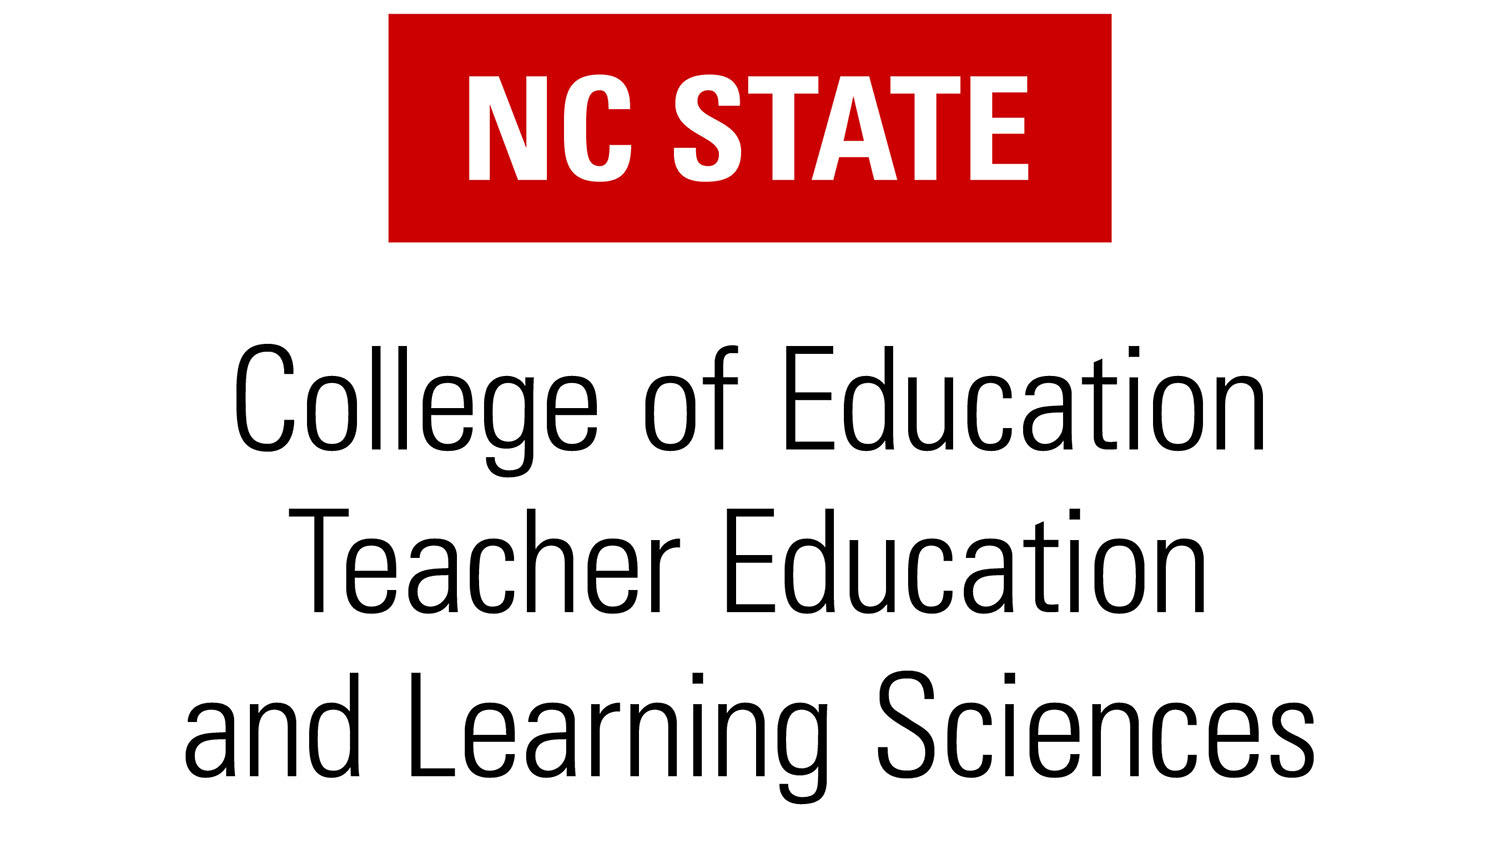 Teacher Education and Learning Sciences